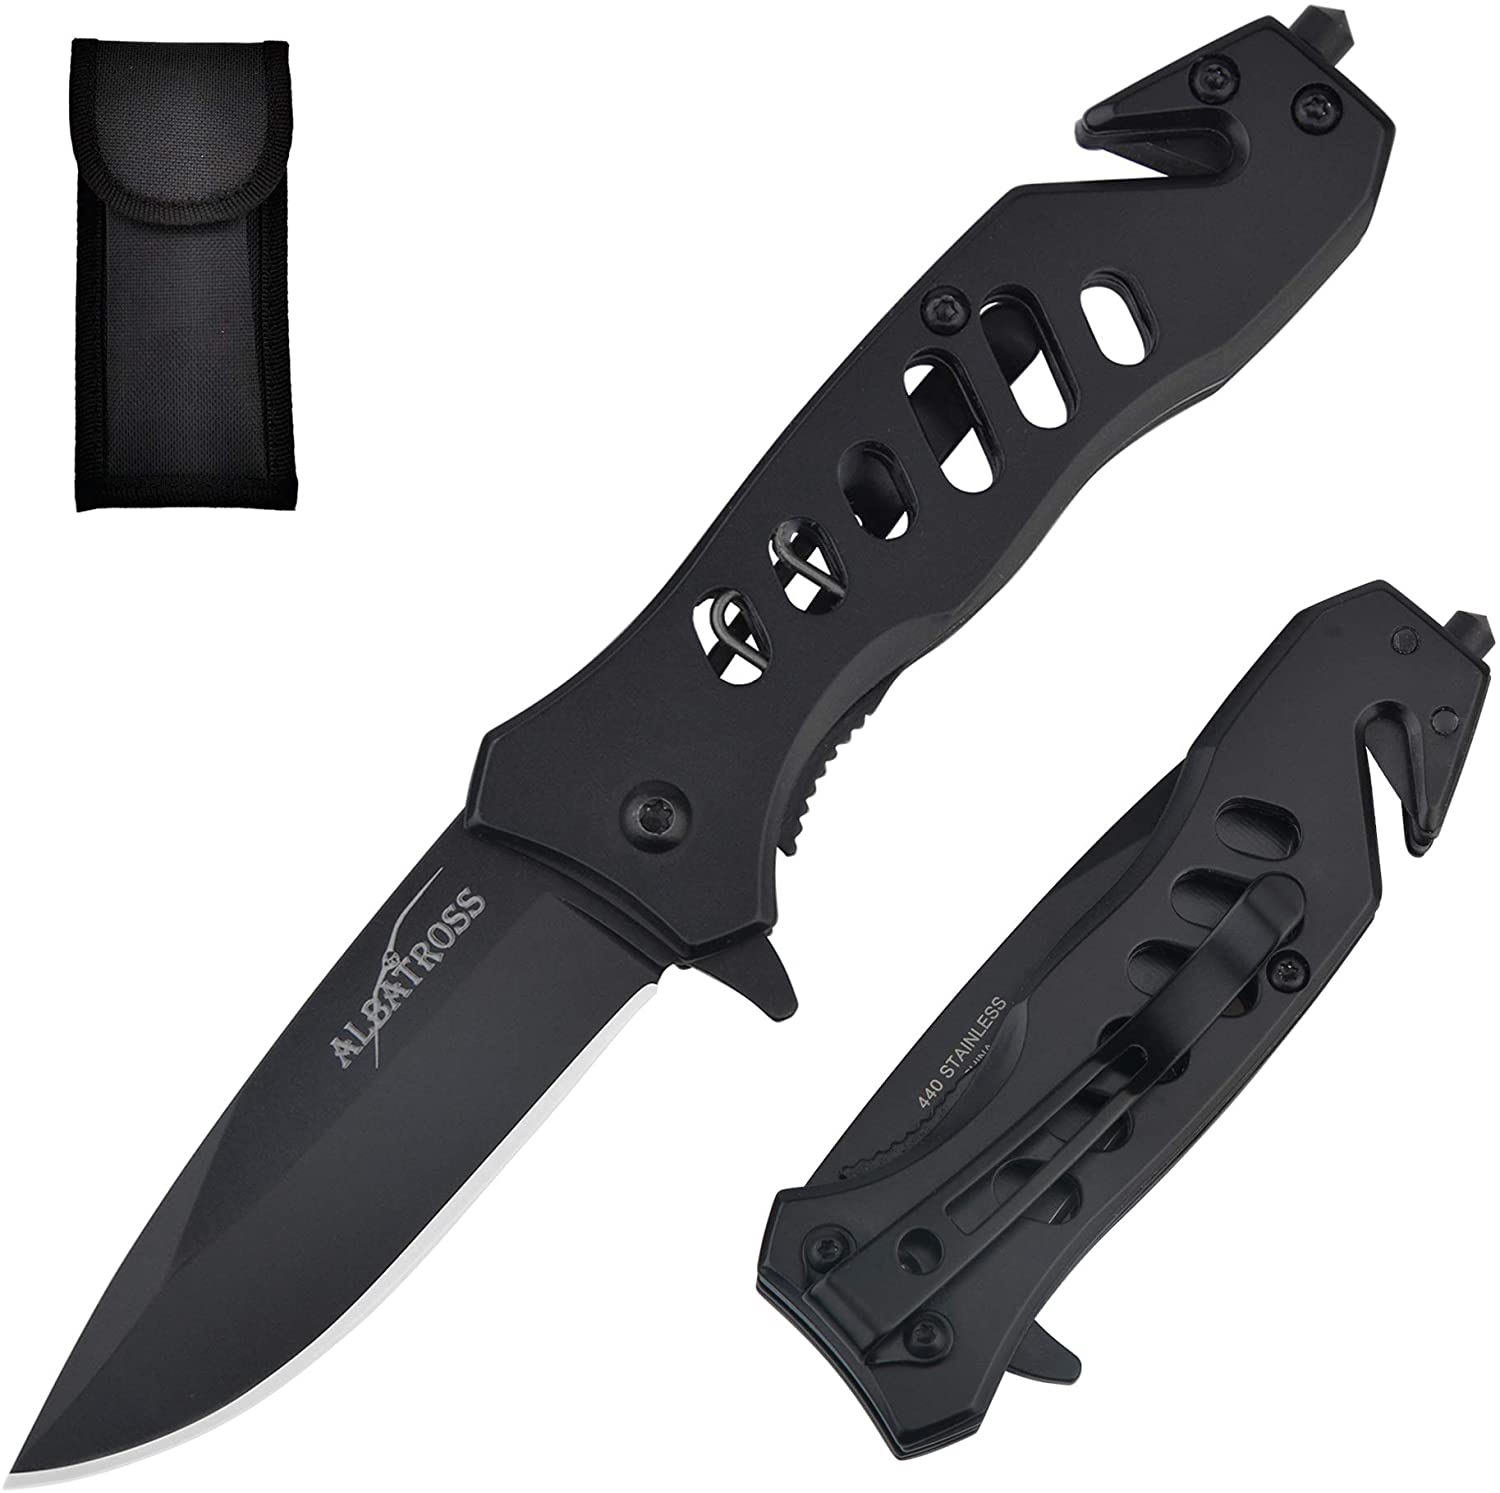 Sharp Tactical Folding Spring Assisted Pocket Knife with Lock- 4.5oz (127g)